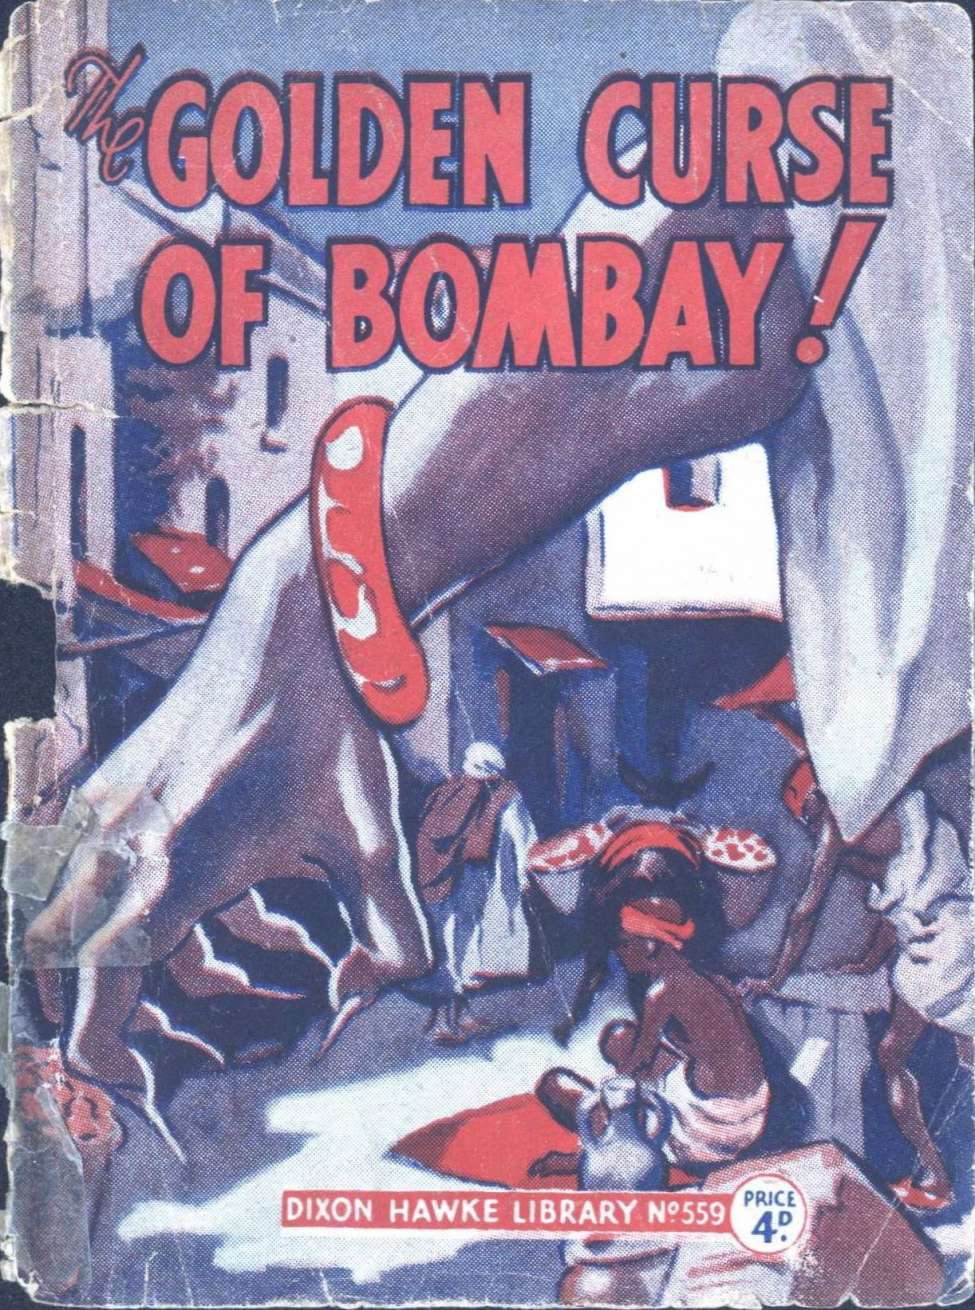 Book Cover For Dixon Hawke Library 559 = The Golden Curse of Bombay